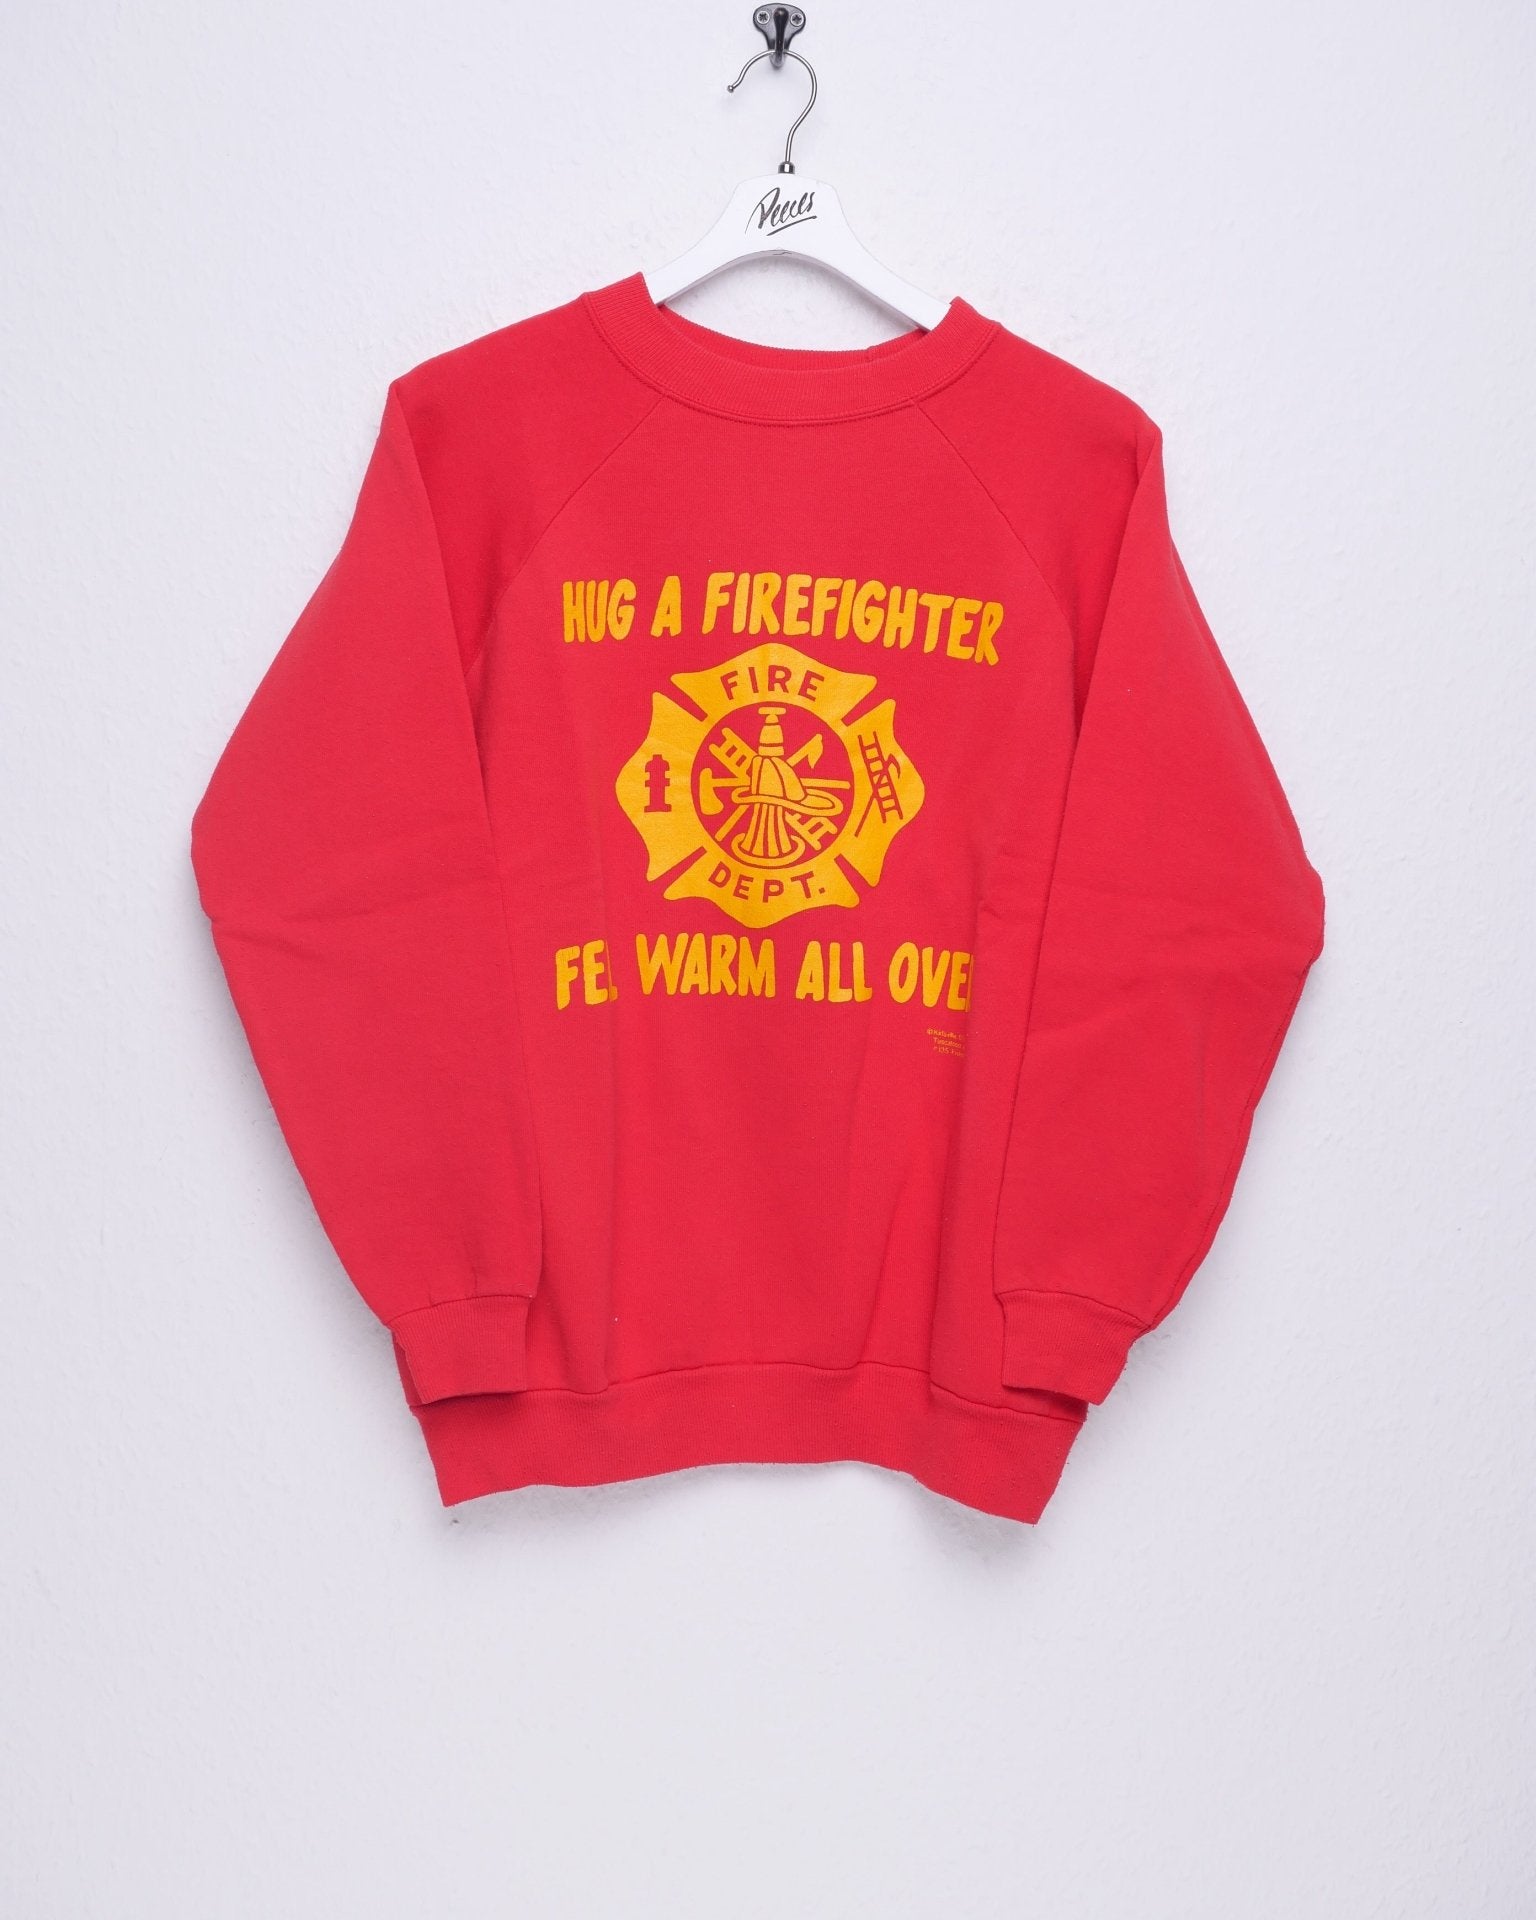 Hug A Firefighter printed Spellout Sweater - Peeces